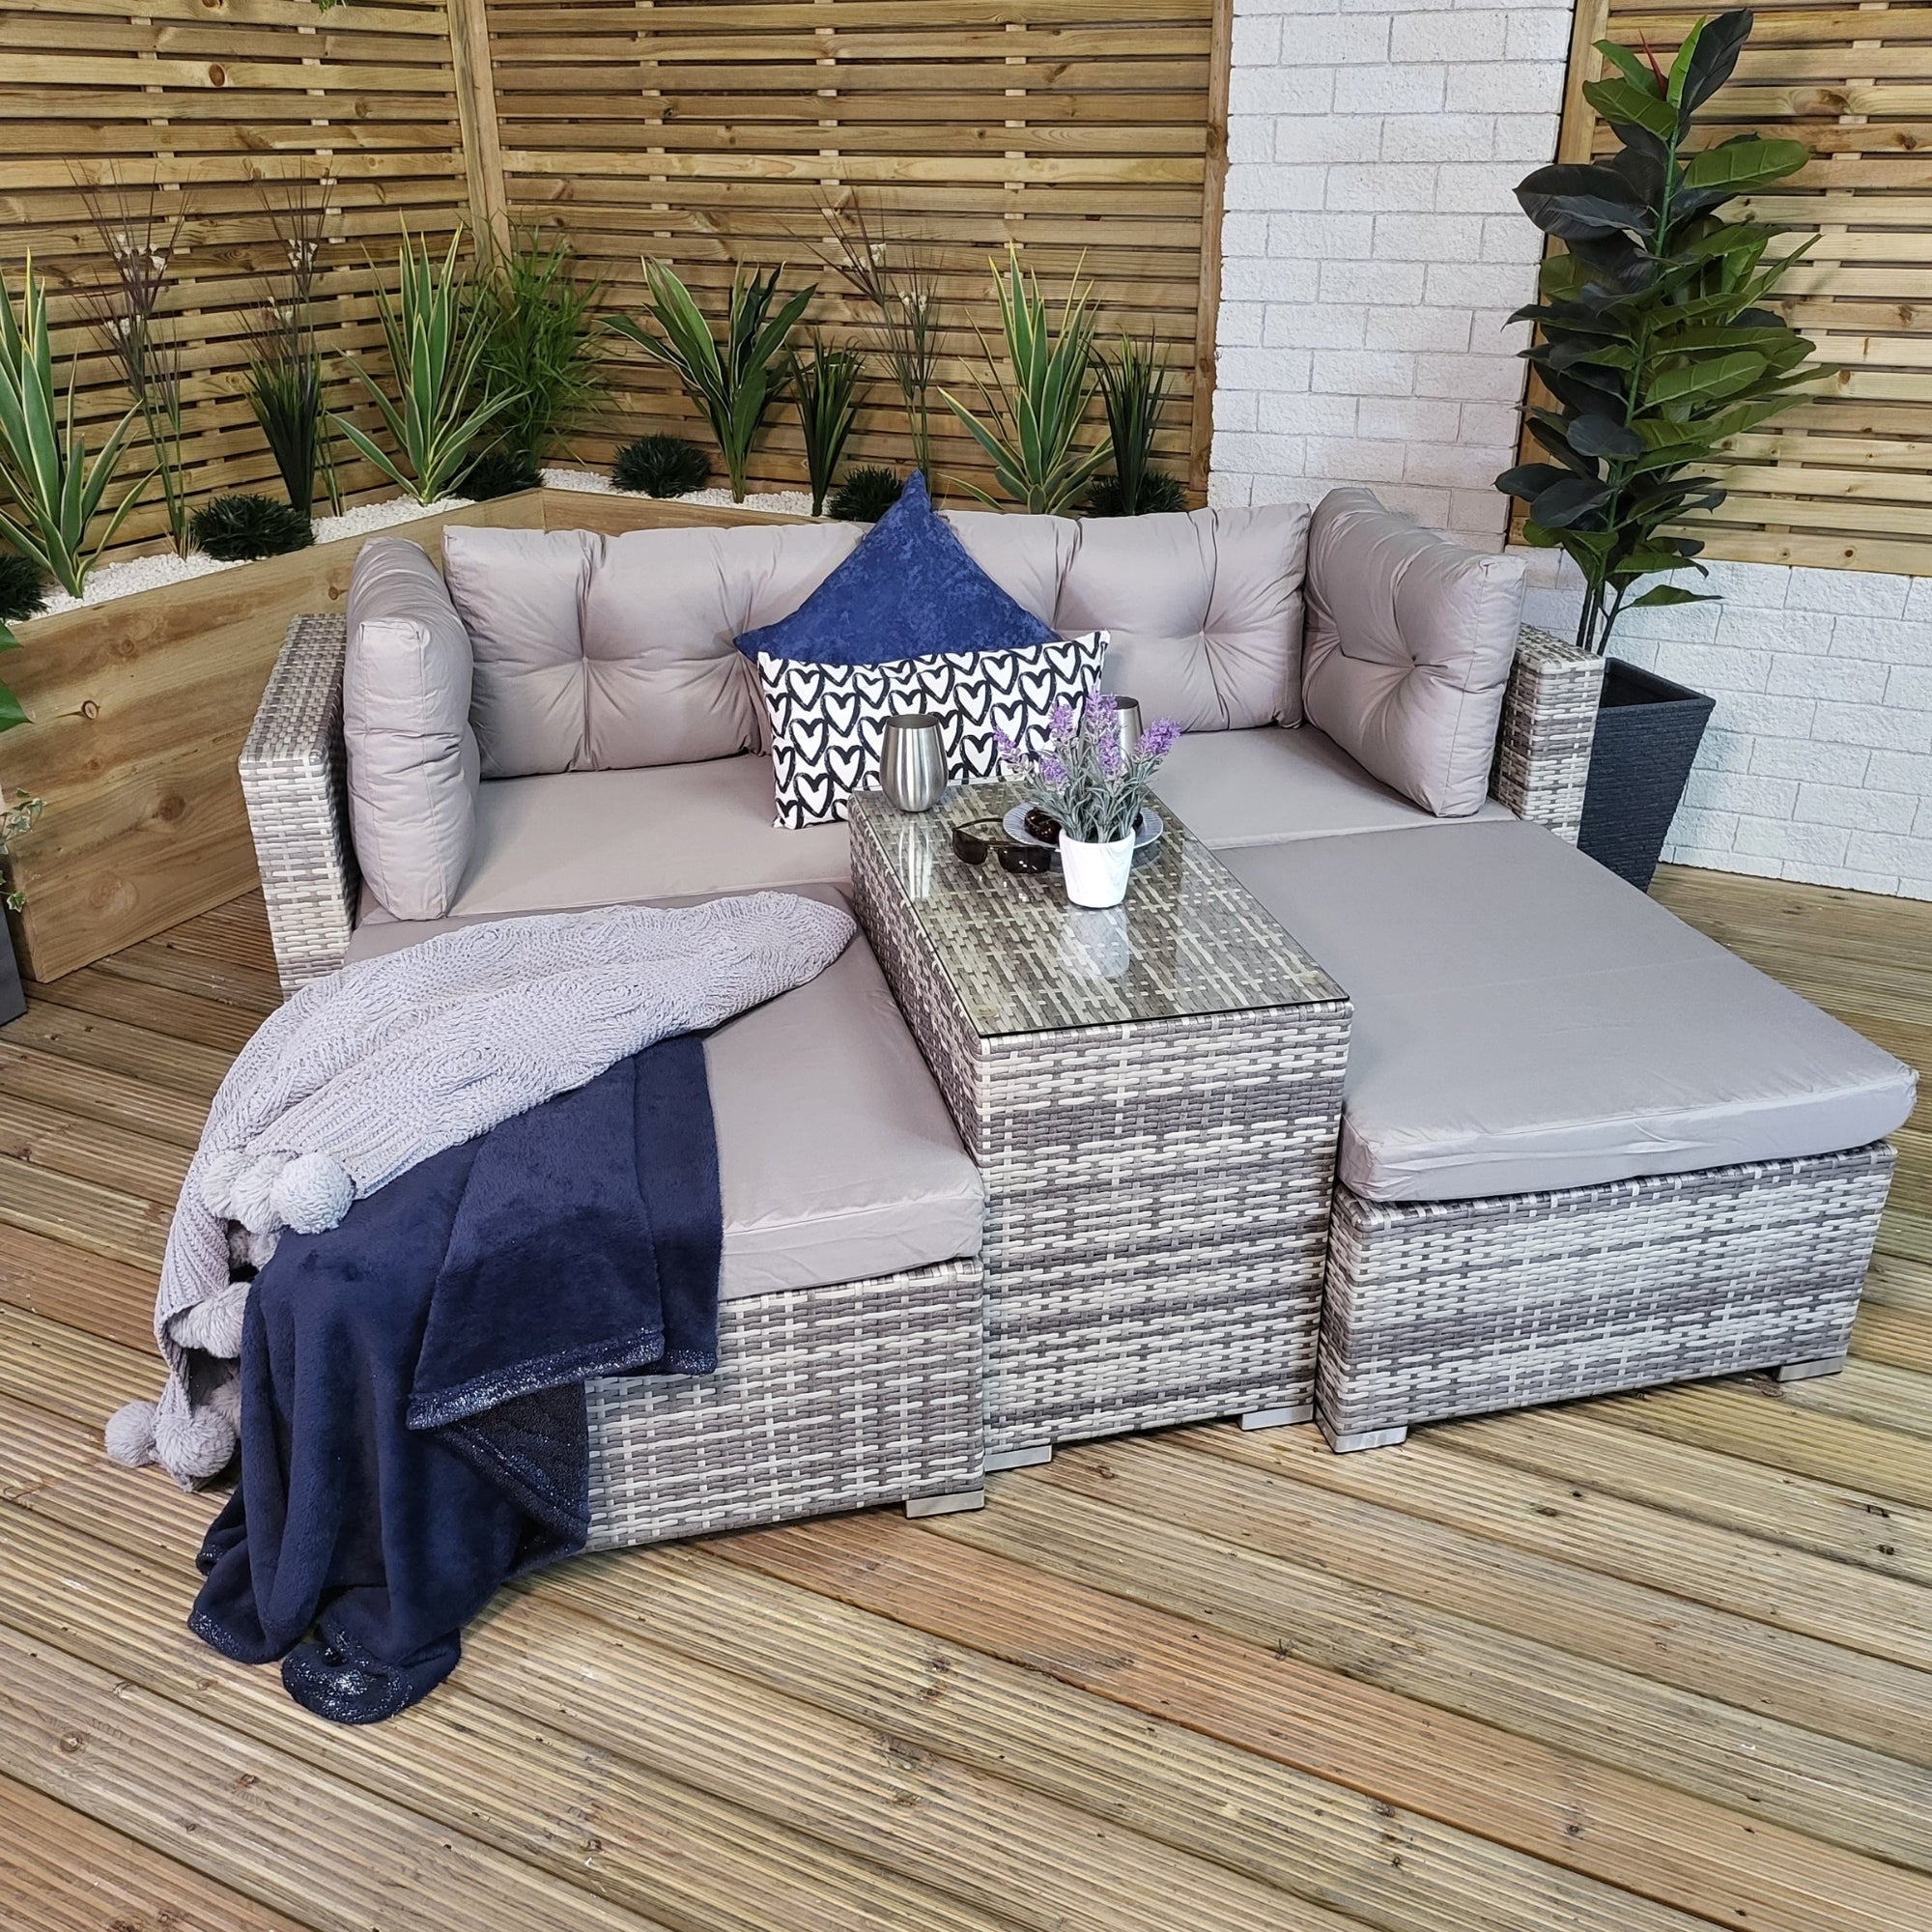 4 Seater Grey Rattan Relaxer Day Bed Furniture Set